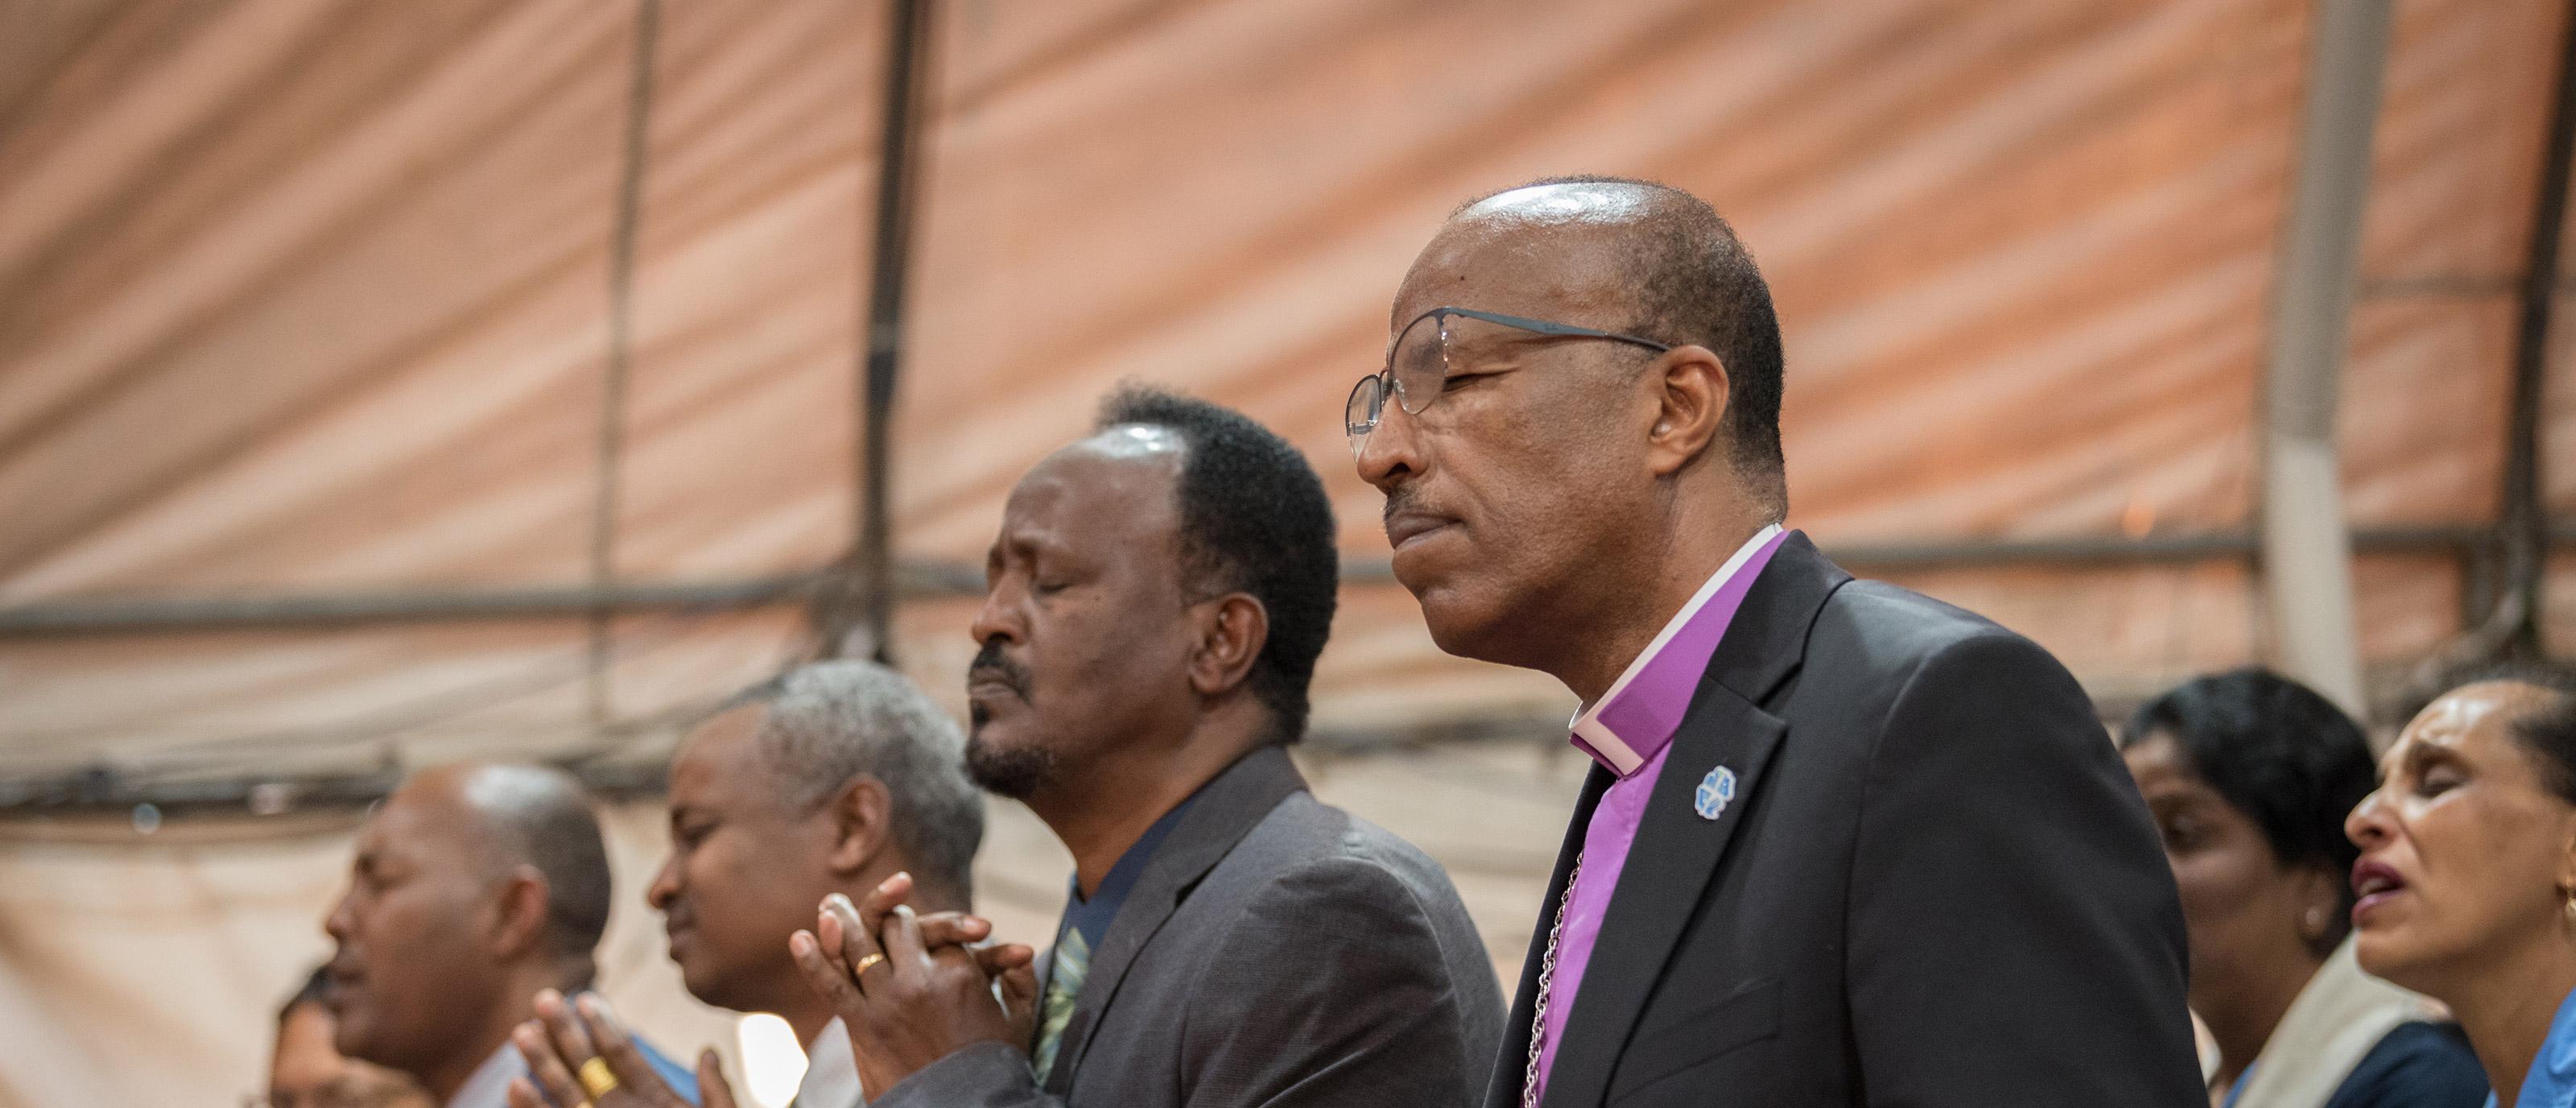 EECMY President Rev. Yonas Yigezu Dibisa and other congregants during Sunday worship in one of the church's congregations in the capital Addis Ababa. Photo: LWF/Albin Hillert 